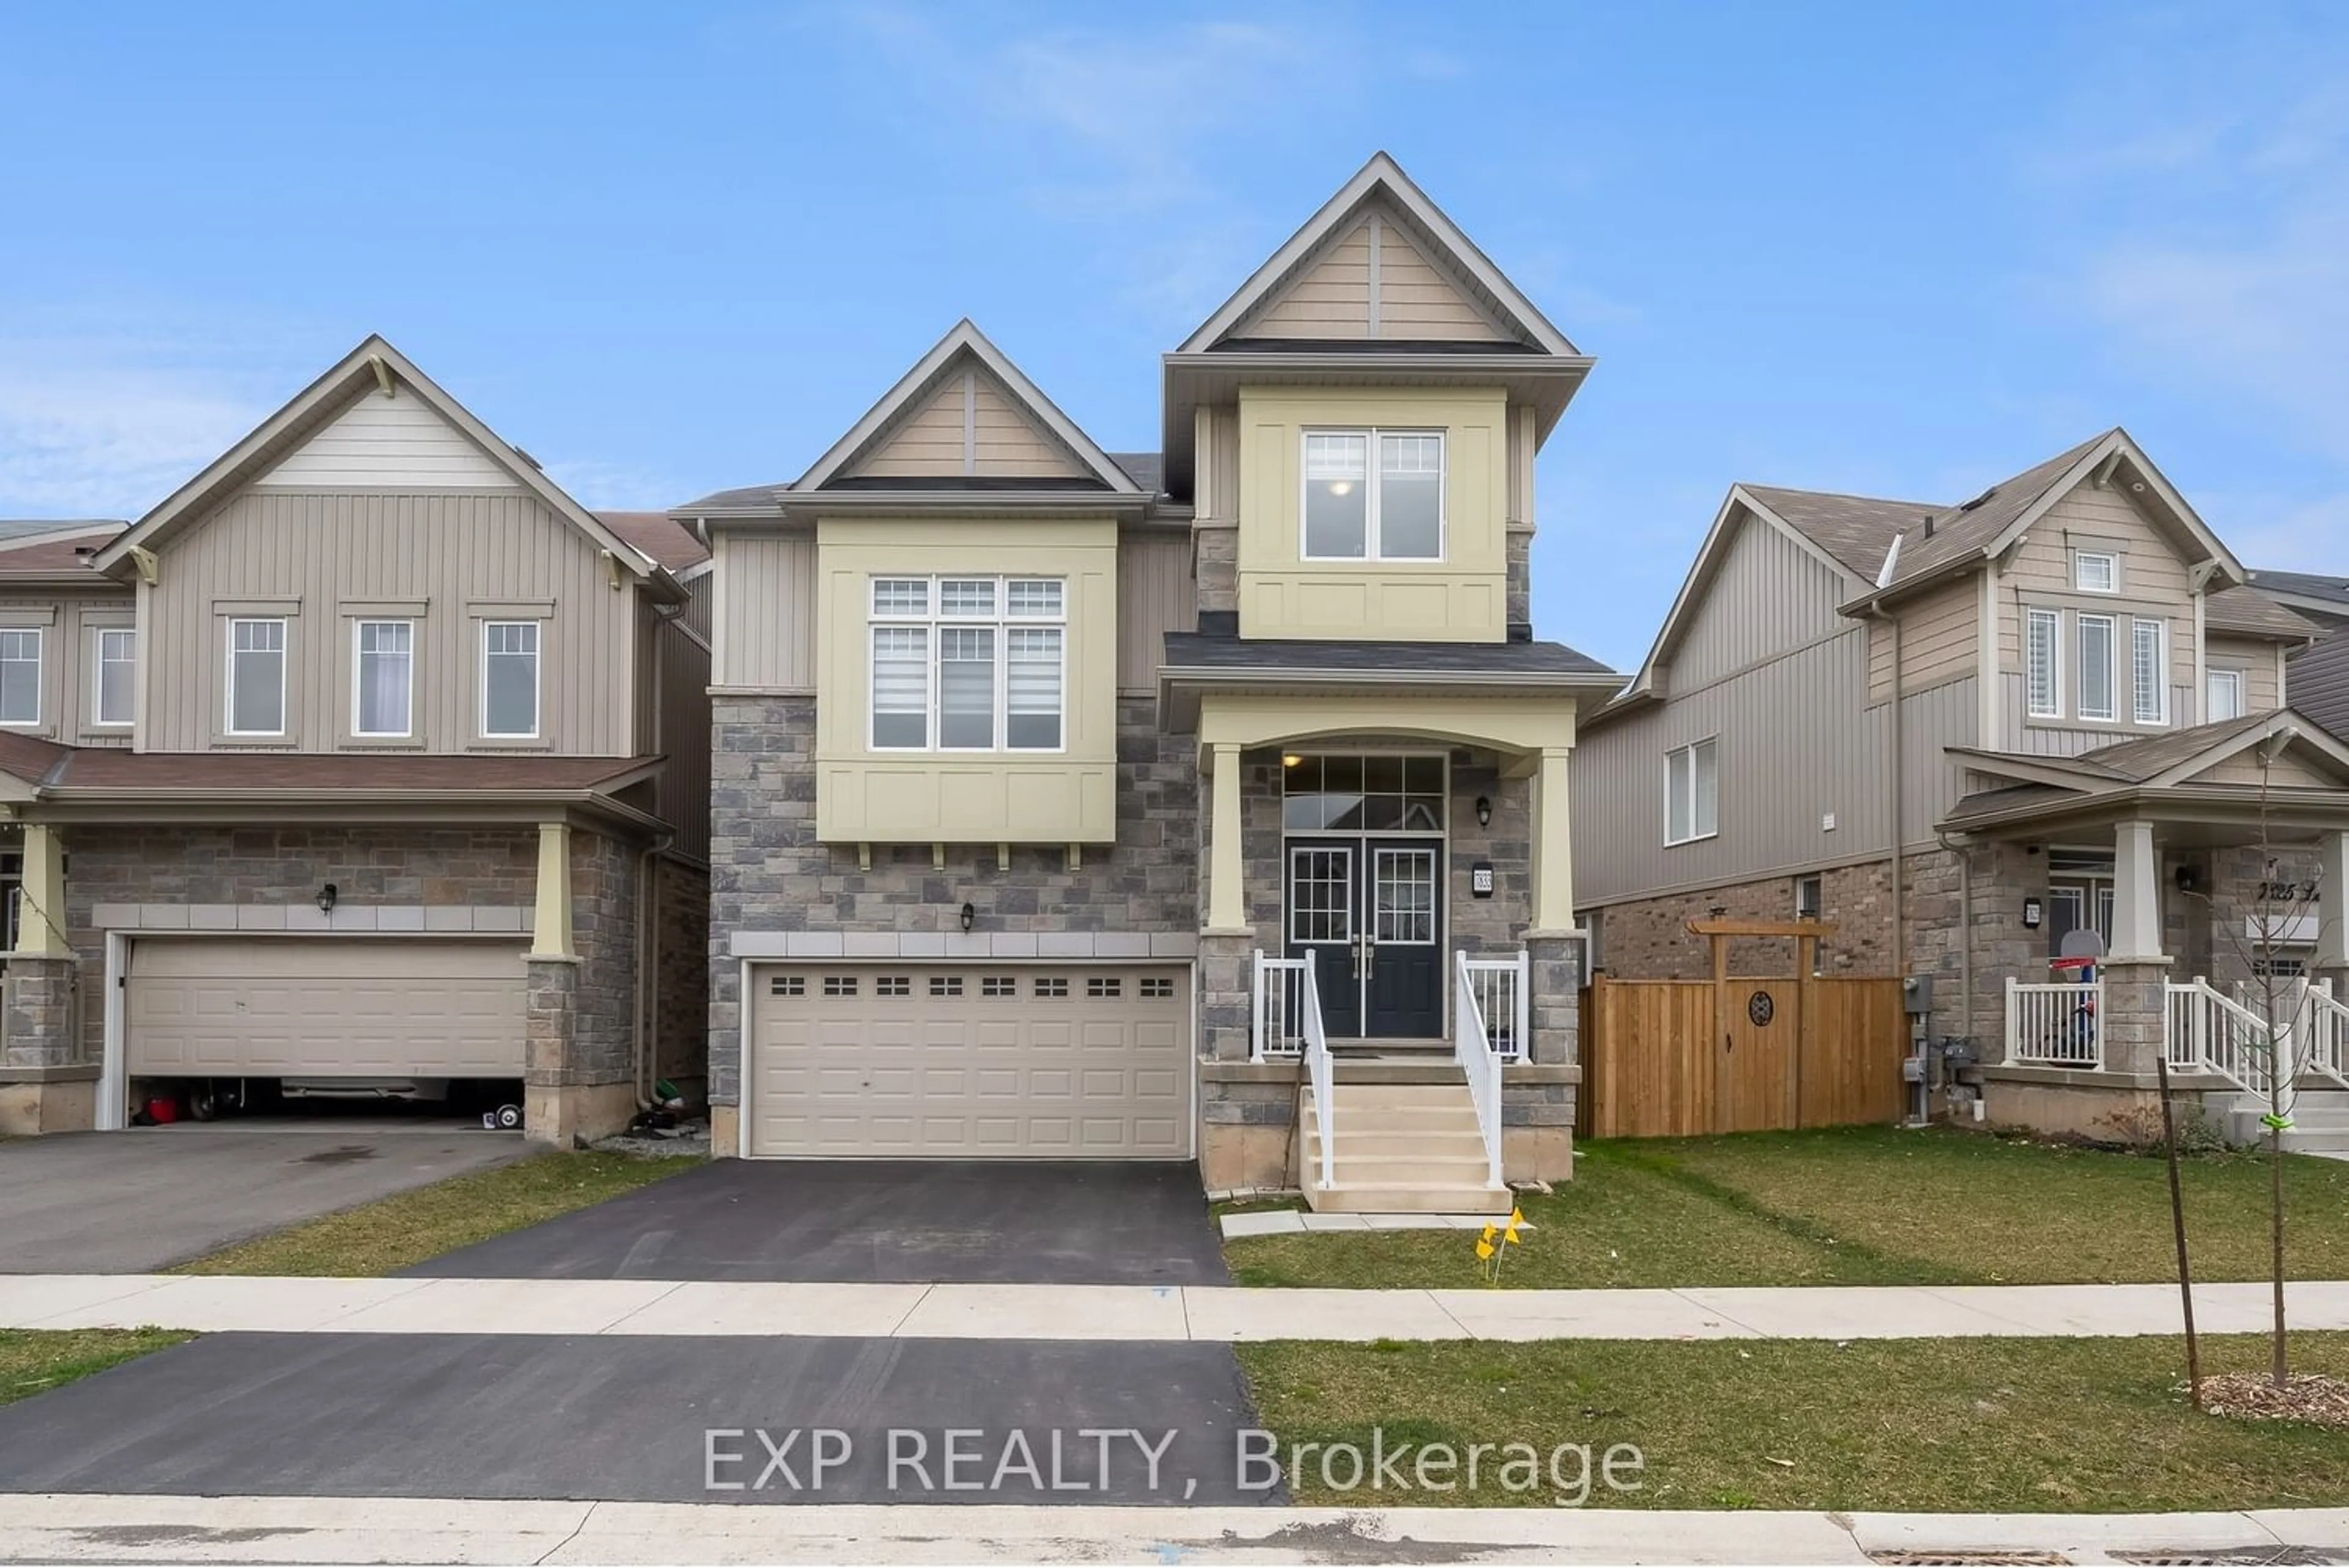 Frontside or backside of a home for 7833 Longhouse Lane, Niagara Falls Ontario L2H 2Y6